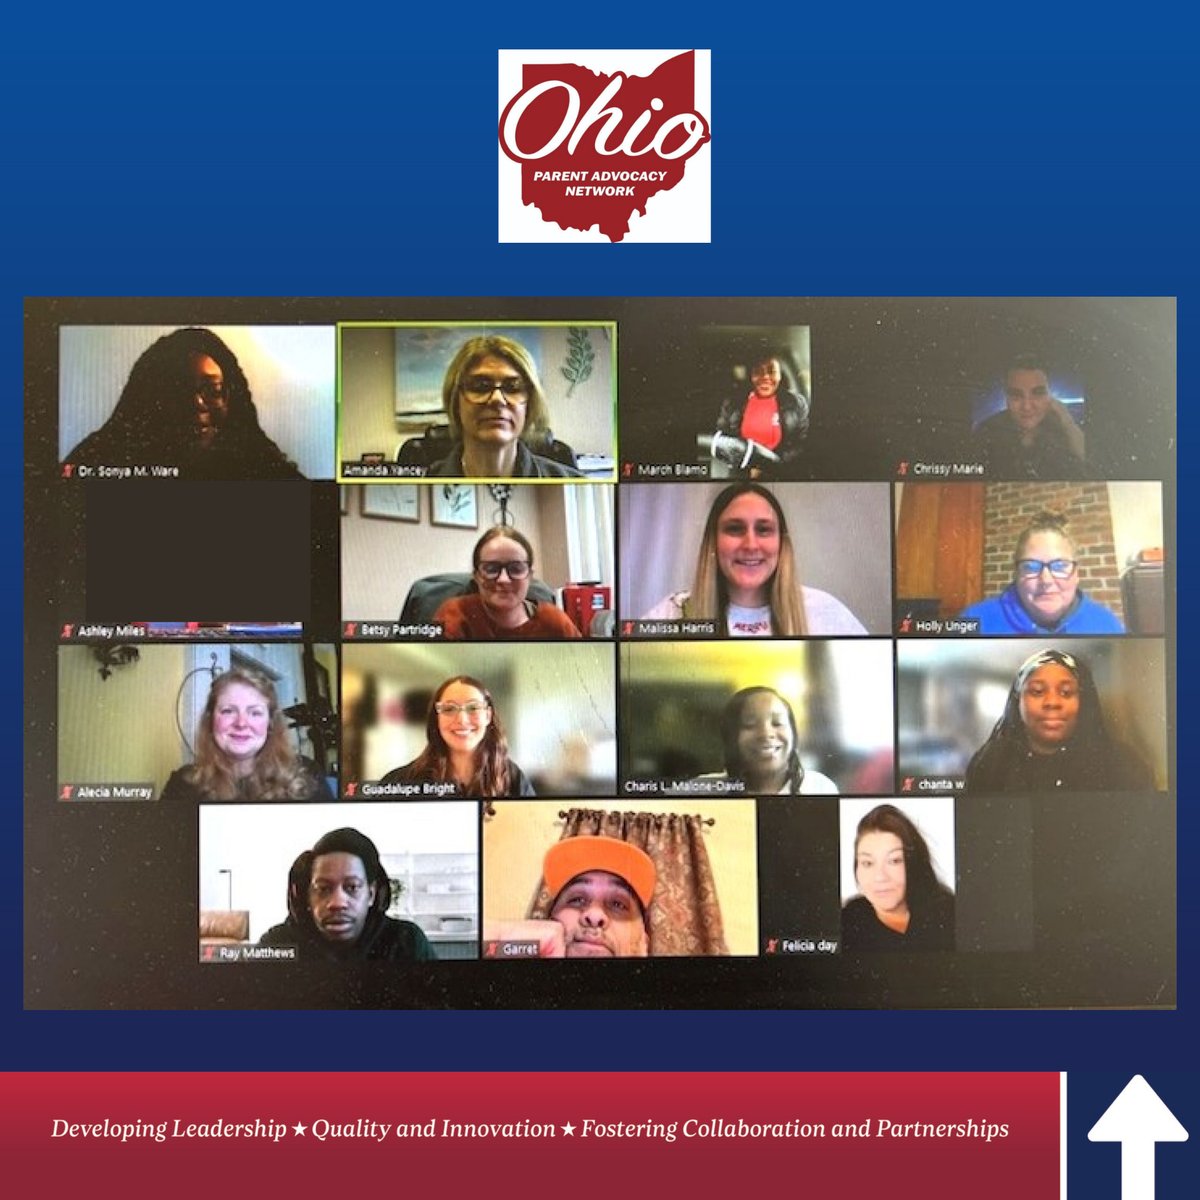 #OPAN Alumni continue to be a voice for children, families and parents in Ohio and across the nation. Earlier this month, with @UPLAN_USA, they hosted a virtual listening session for parents to share their experiences around education after the transition from preschool. #OHSAI